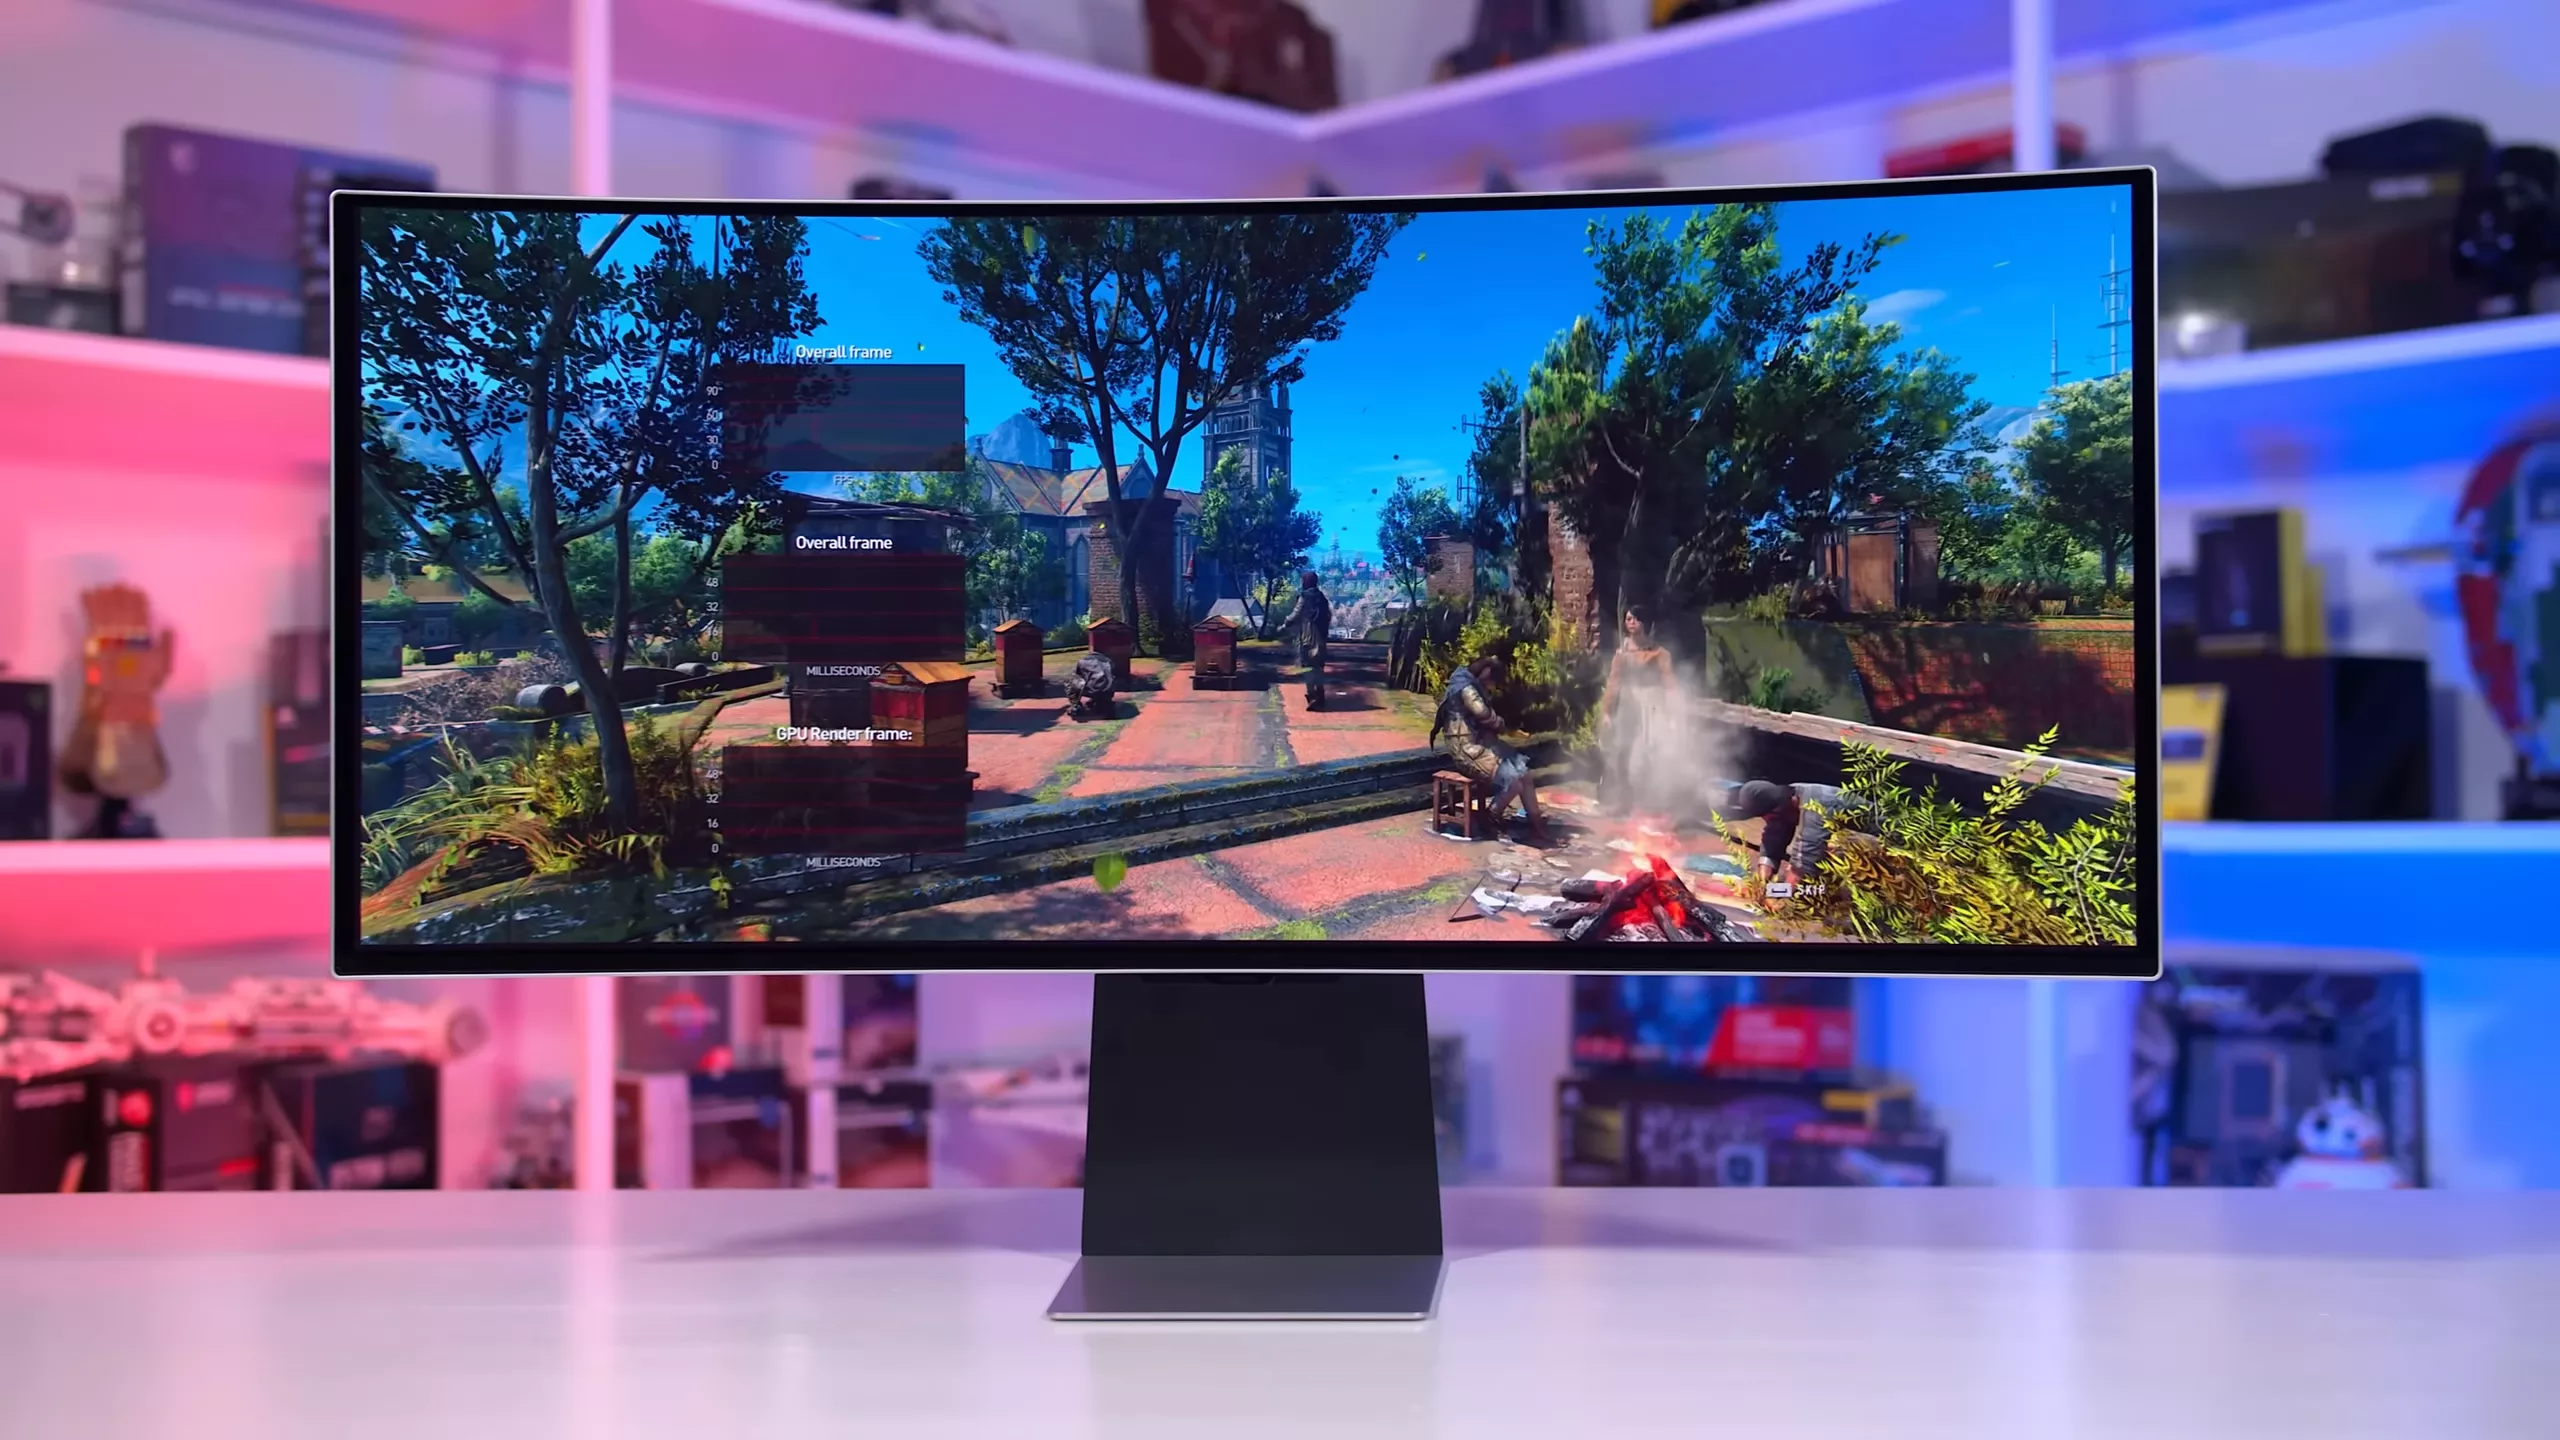 Expect plenty of large 4K OLED gaming monitors with 240Hz refresh rates to arrive next year